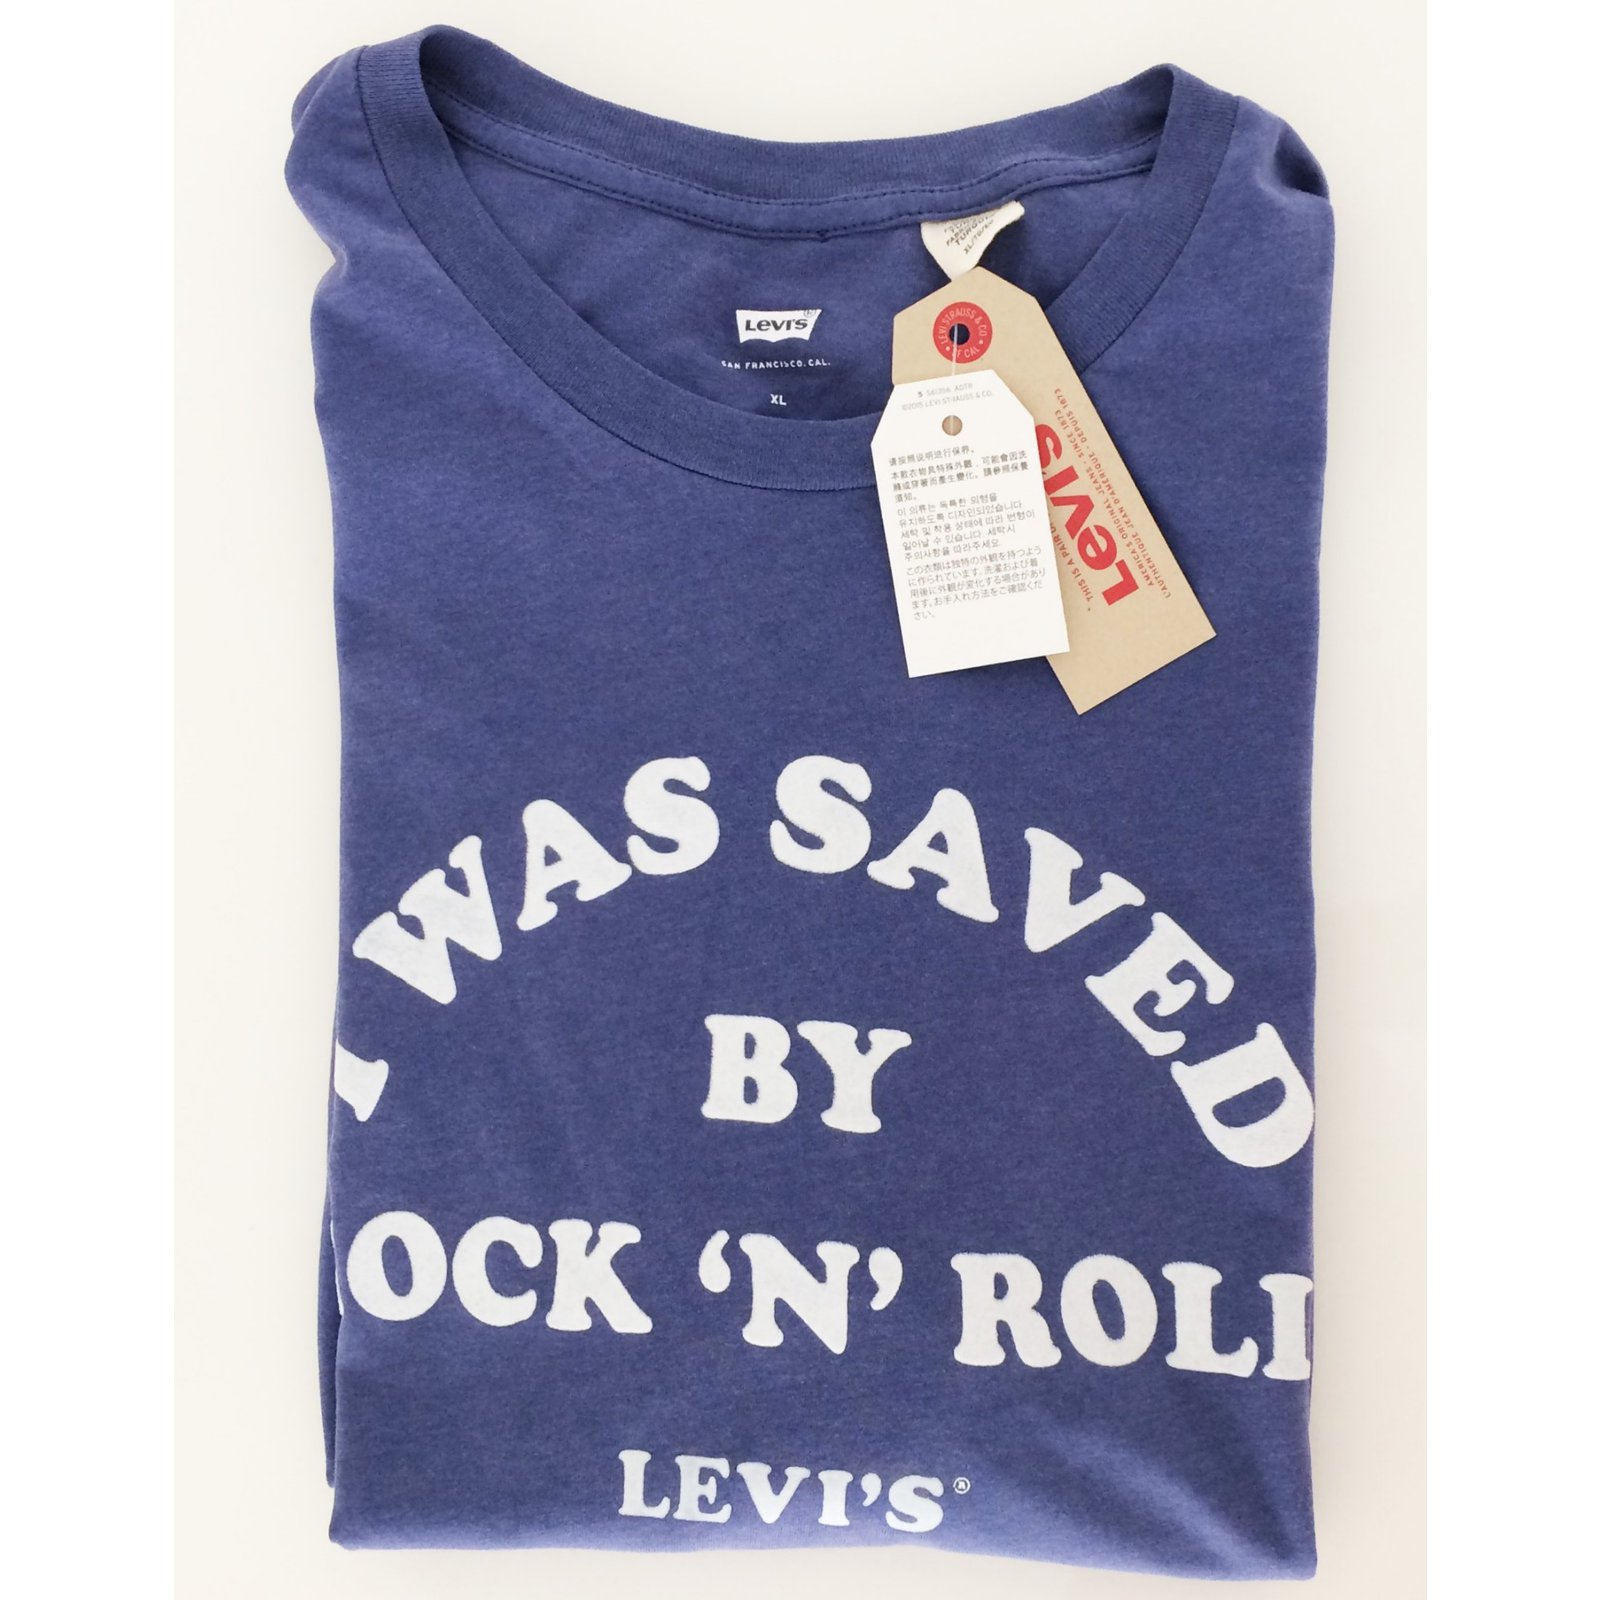 levis shirt tags